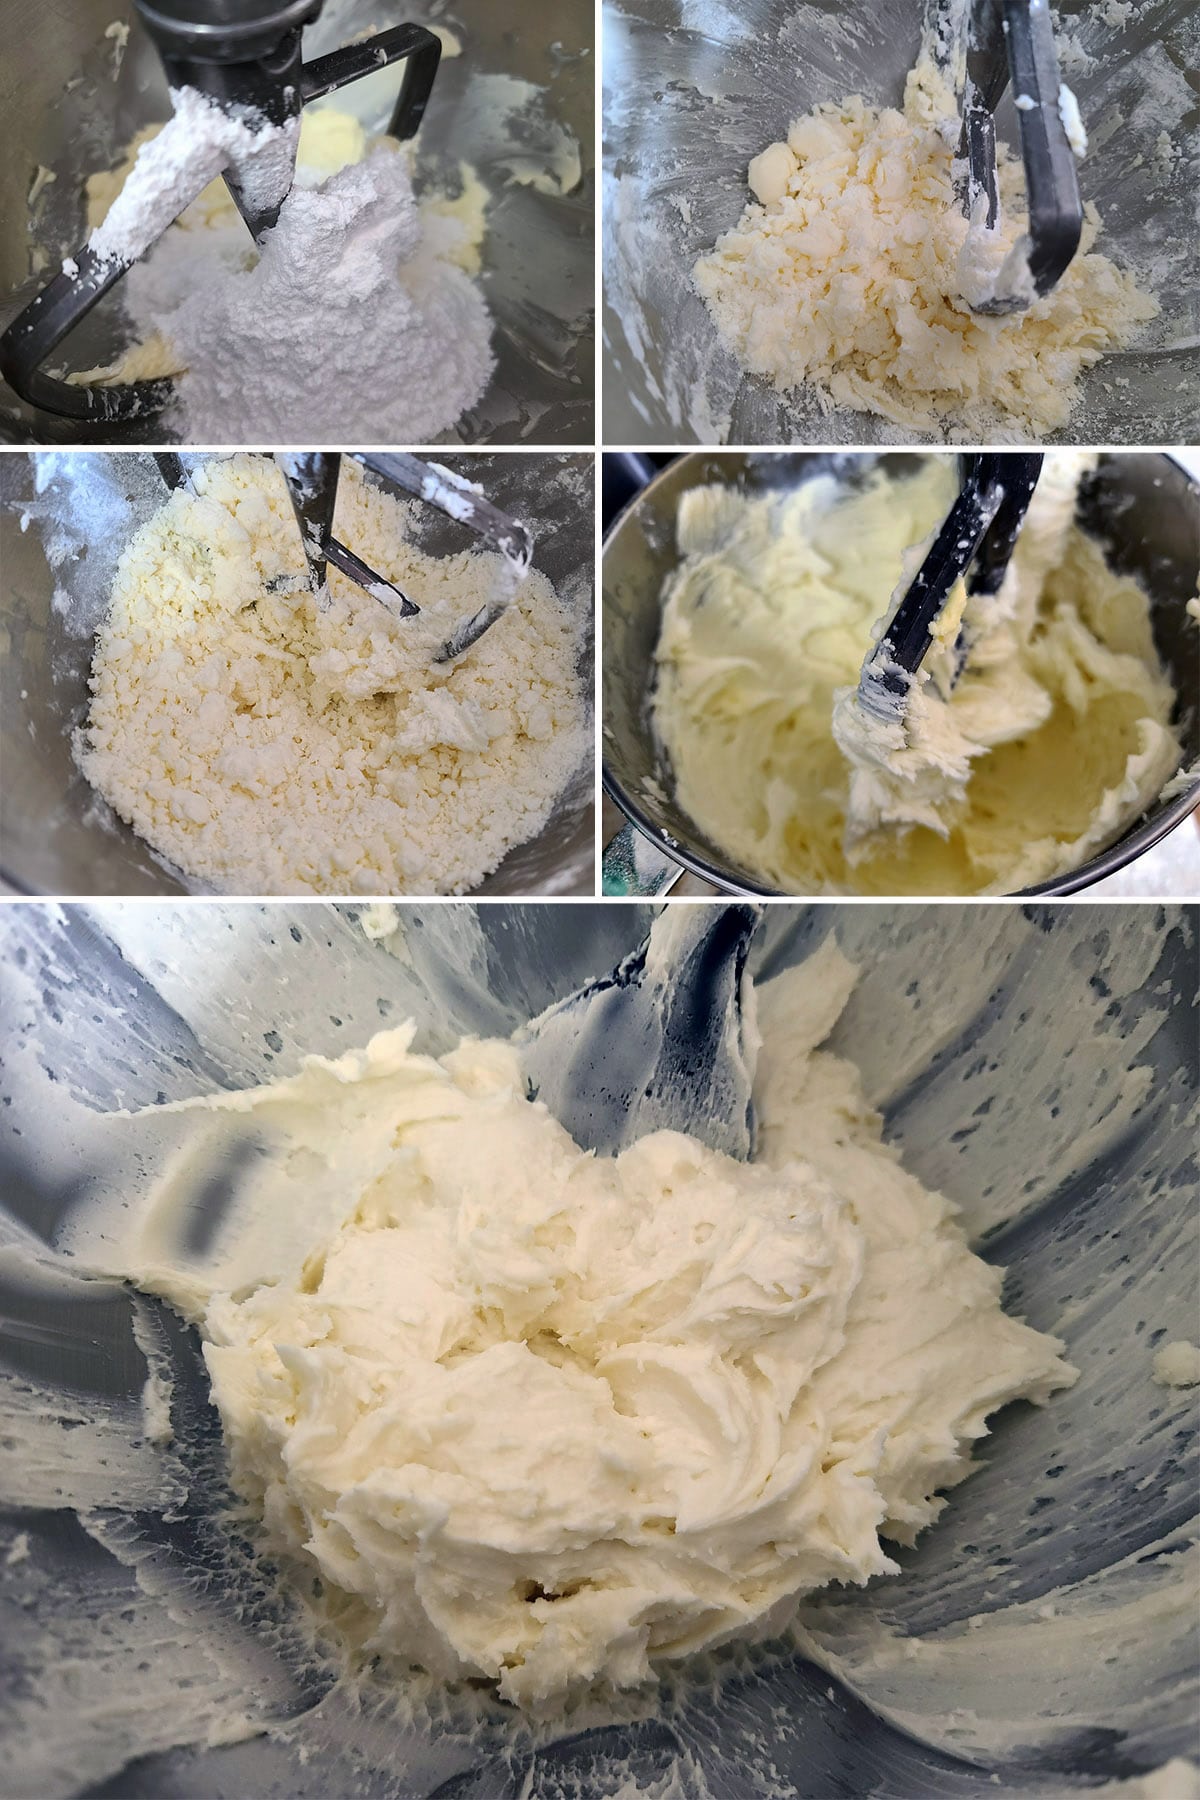 A 5 part image showing the frosting being made.